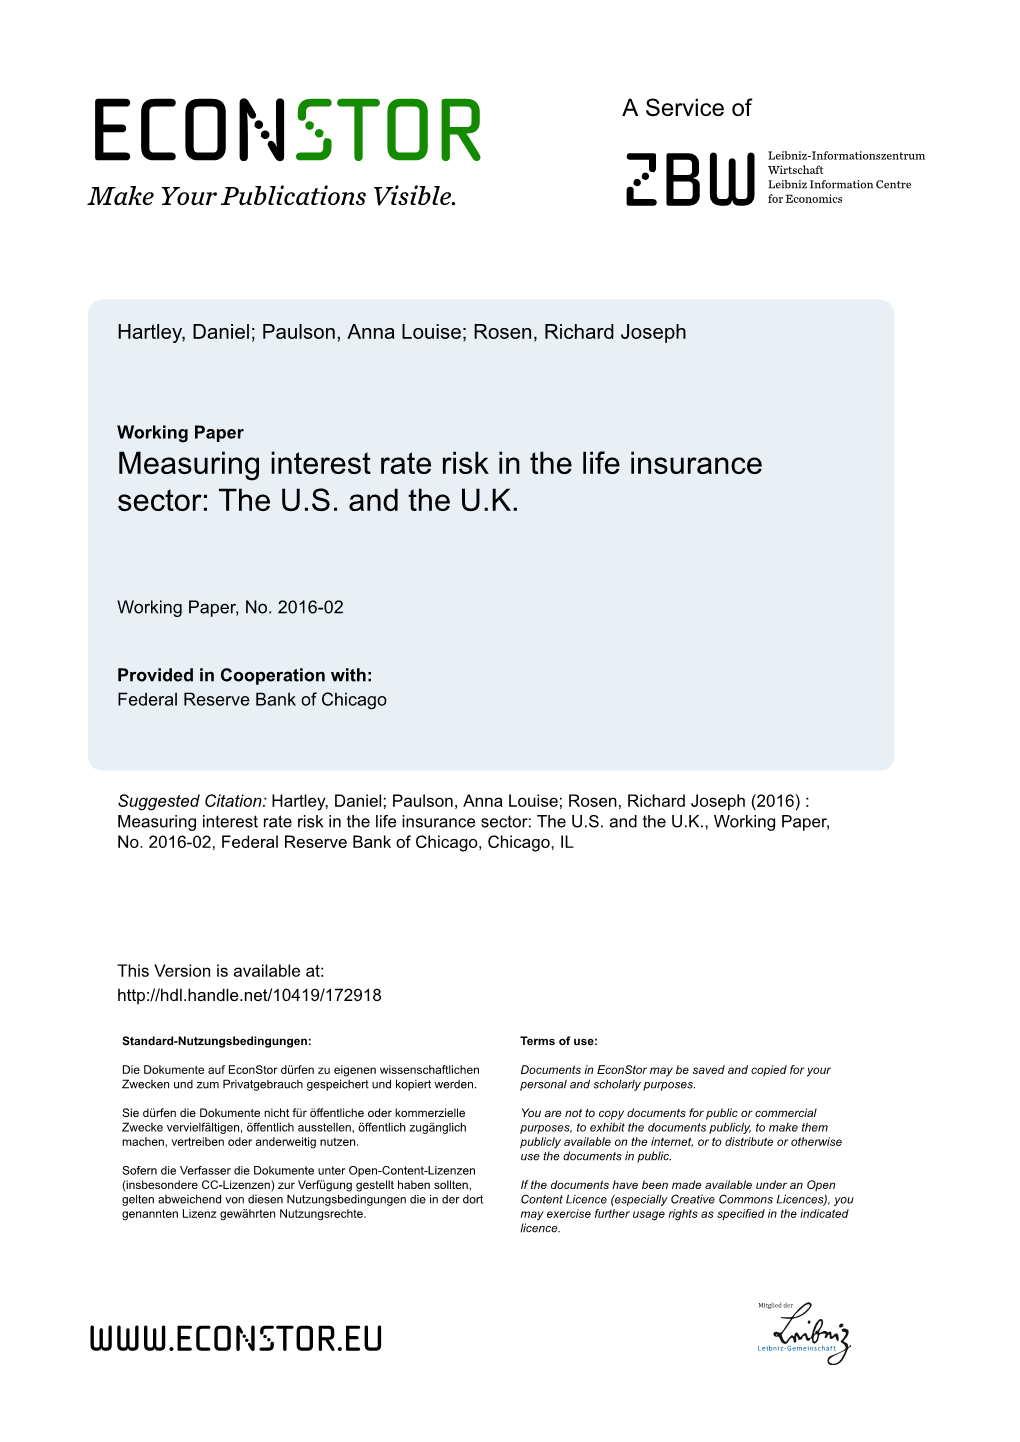 Measuring Interest Rate Risk in the Life Insurance Sector: the U.S